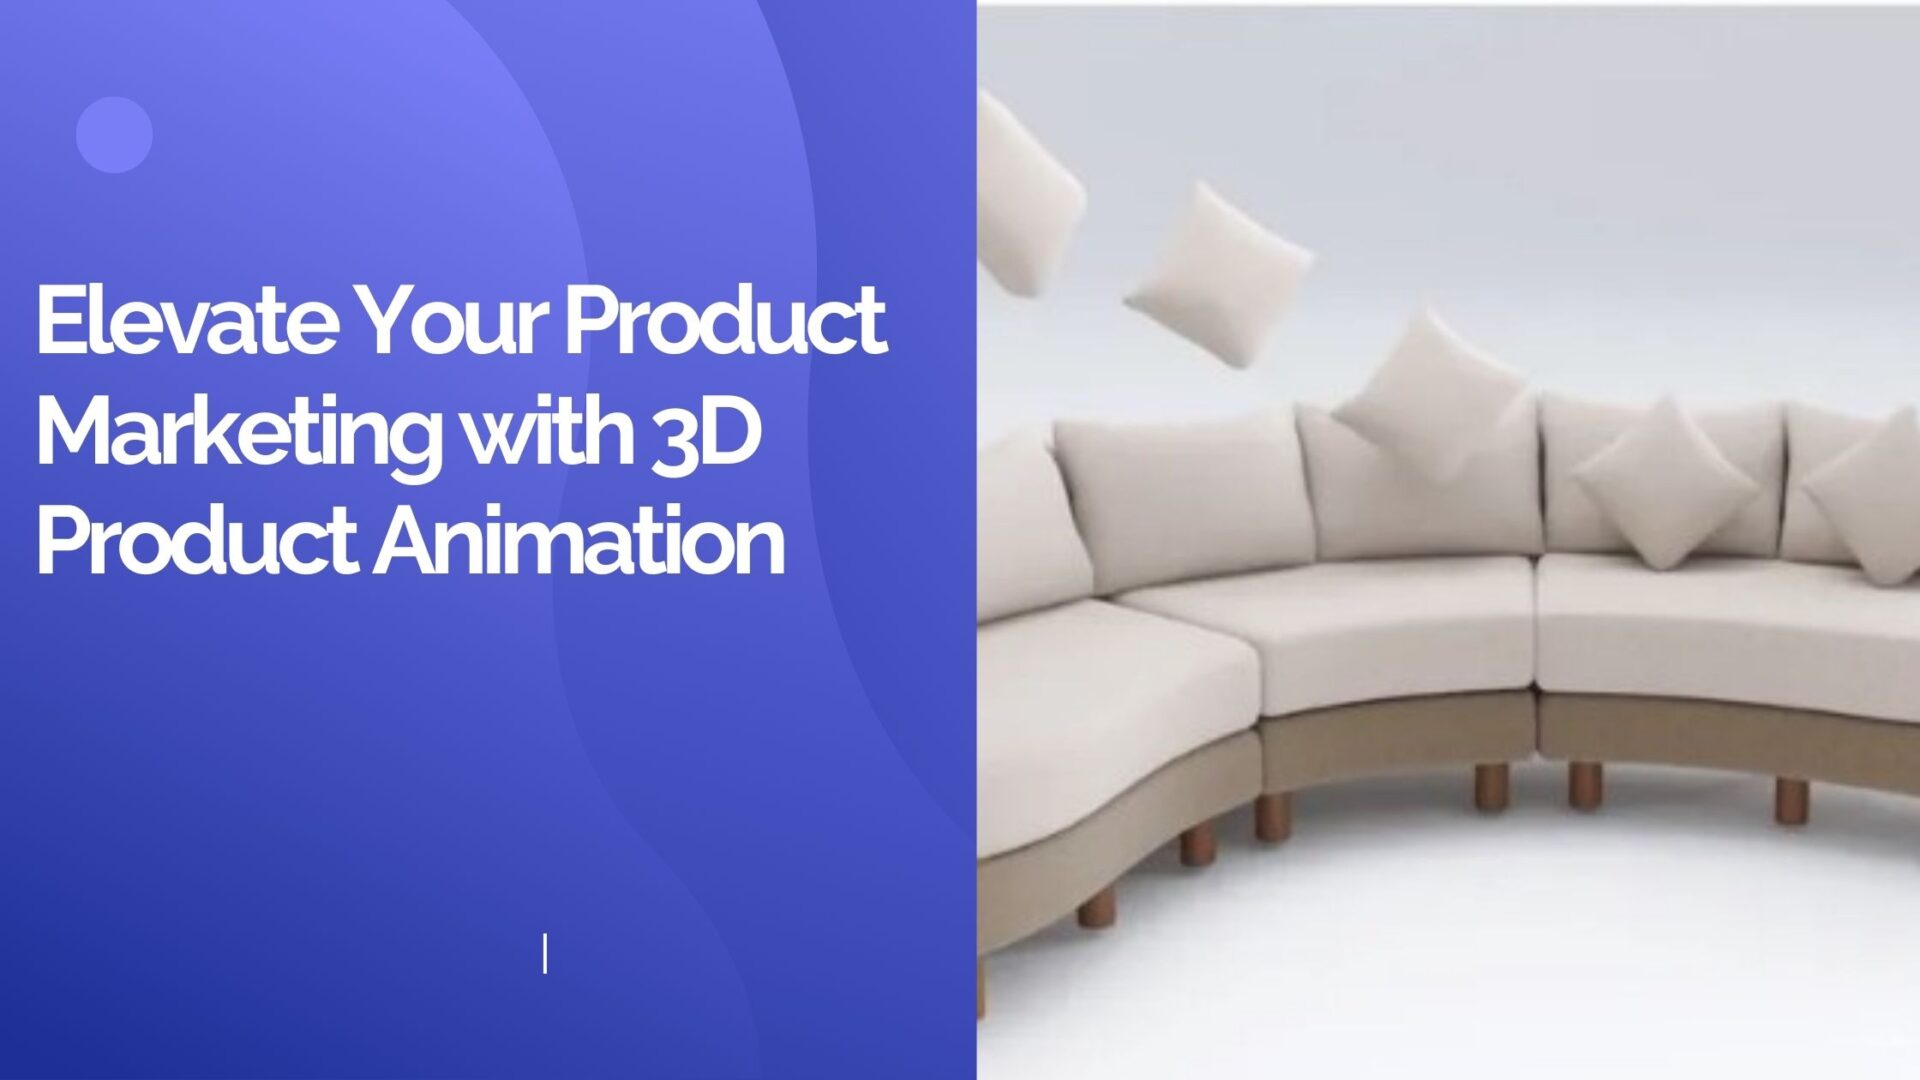 Elevate Your Product Marketing with 3D Product Animation